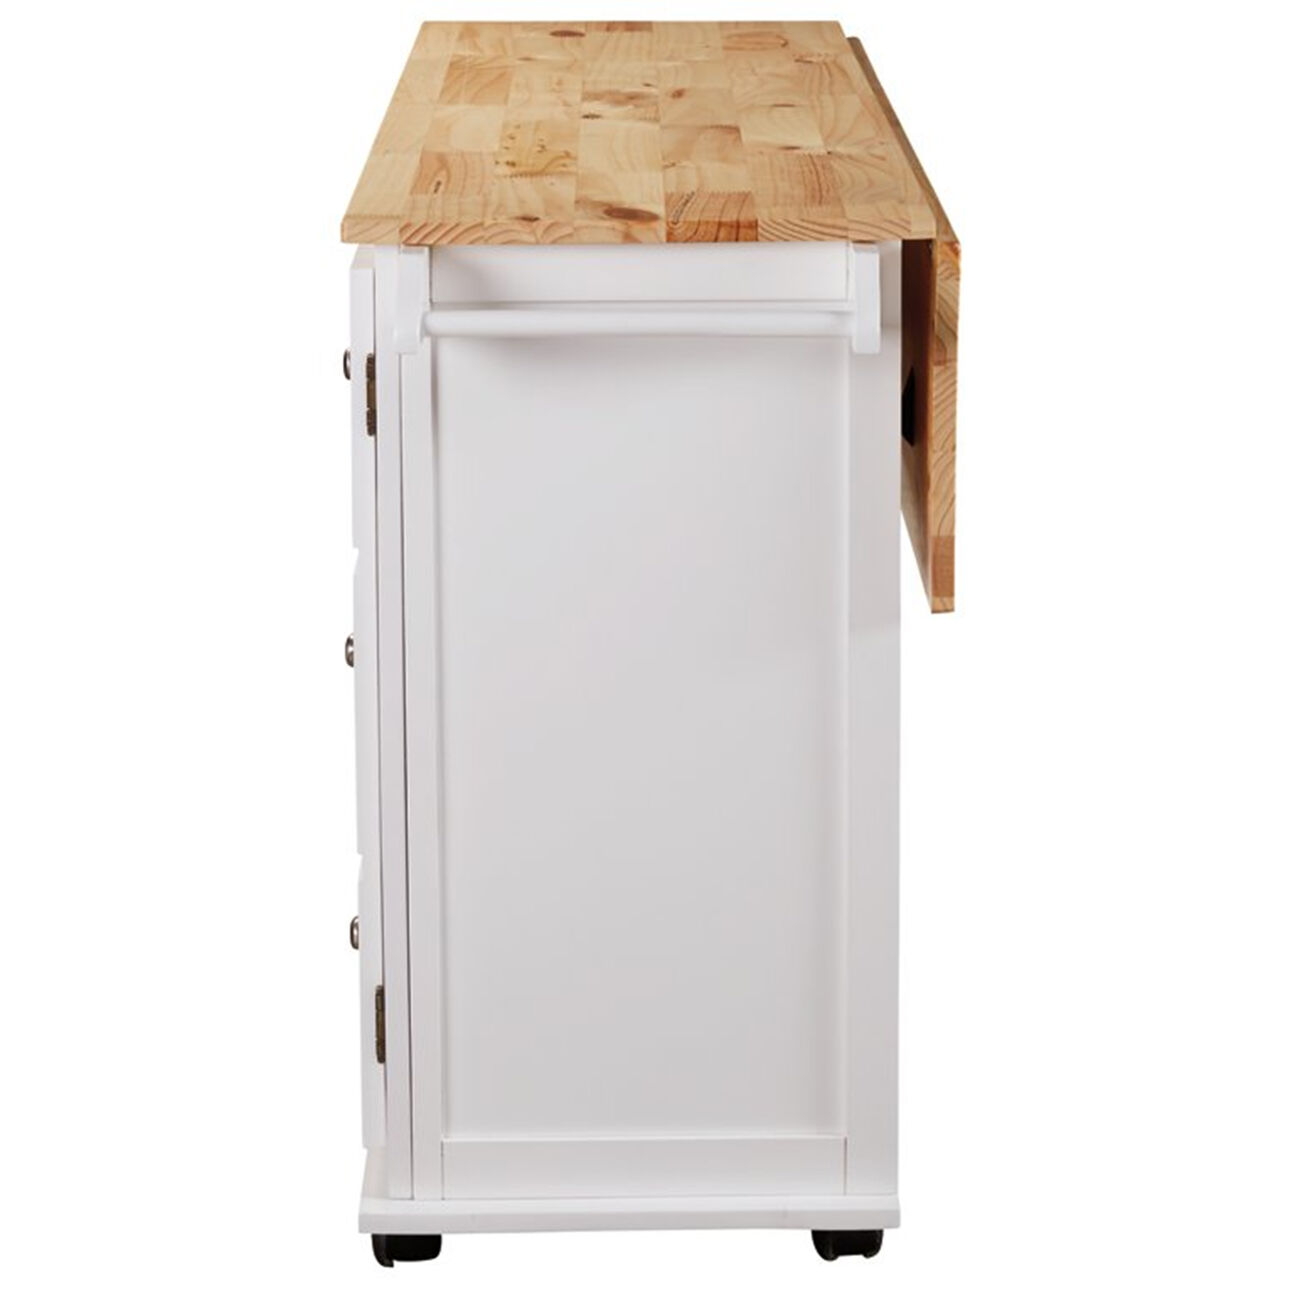 Wooden Kitchen Cart with 3 Doors and 2 Adjustable Shelves, White and Brown